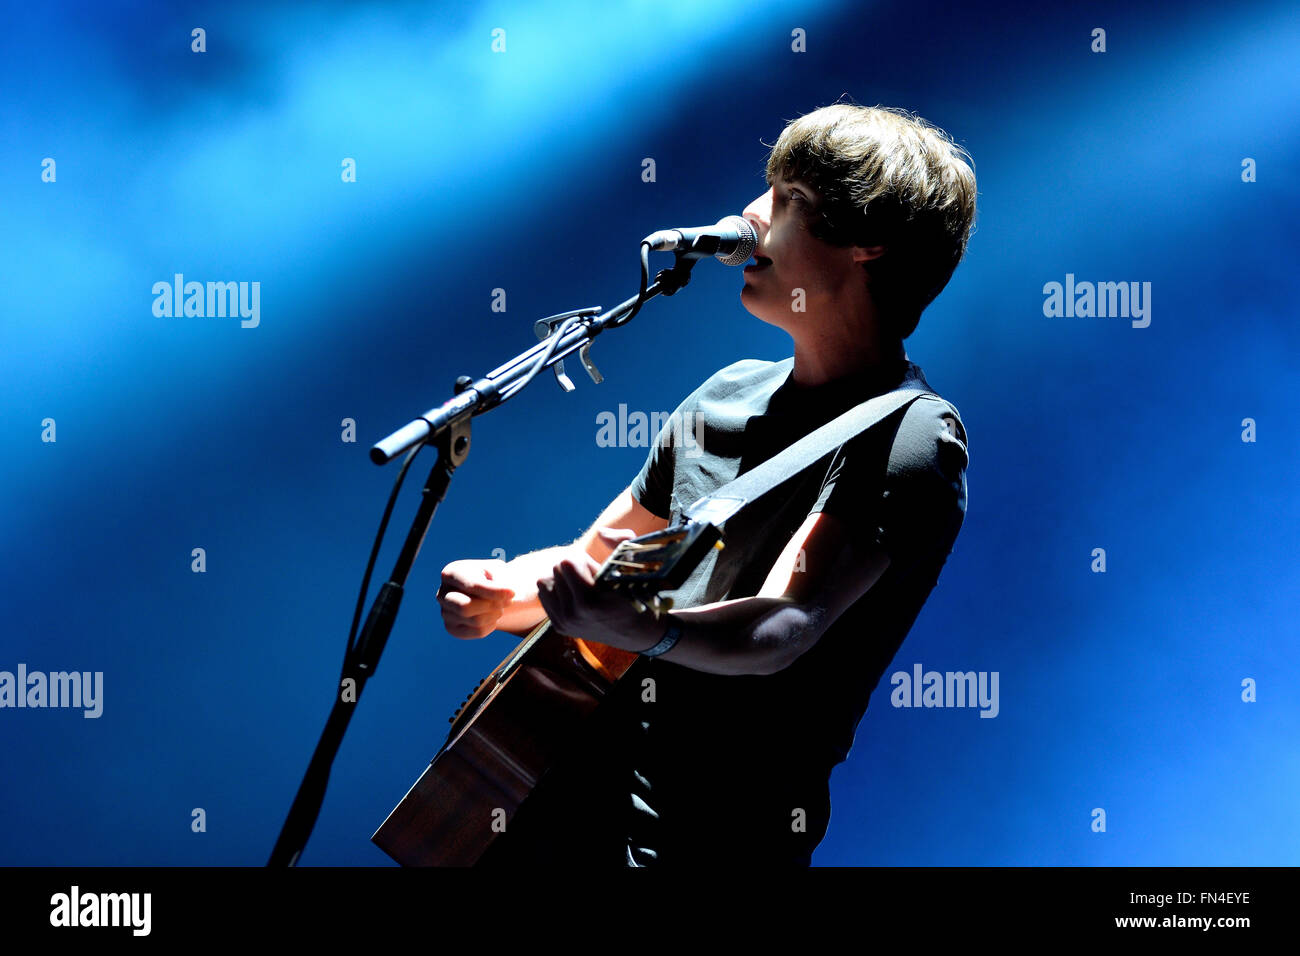 MADRID - SEP 13: Jake Bugg (English Musician, singer and songwriter) concert at Dcode Festival. Stock Photo